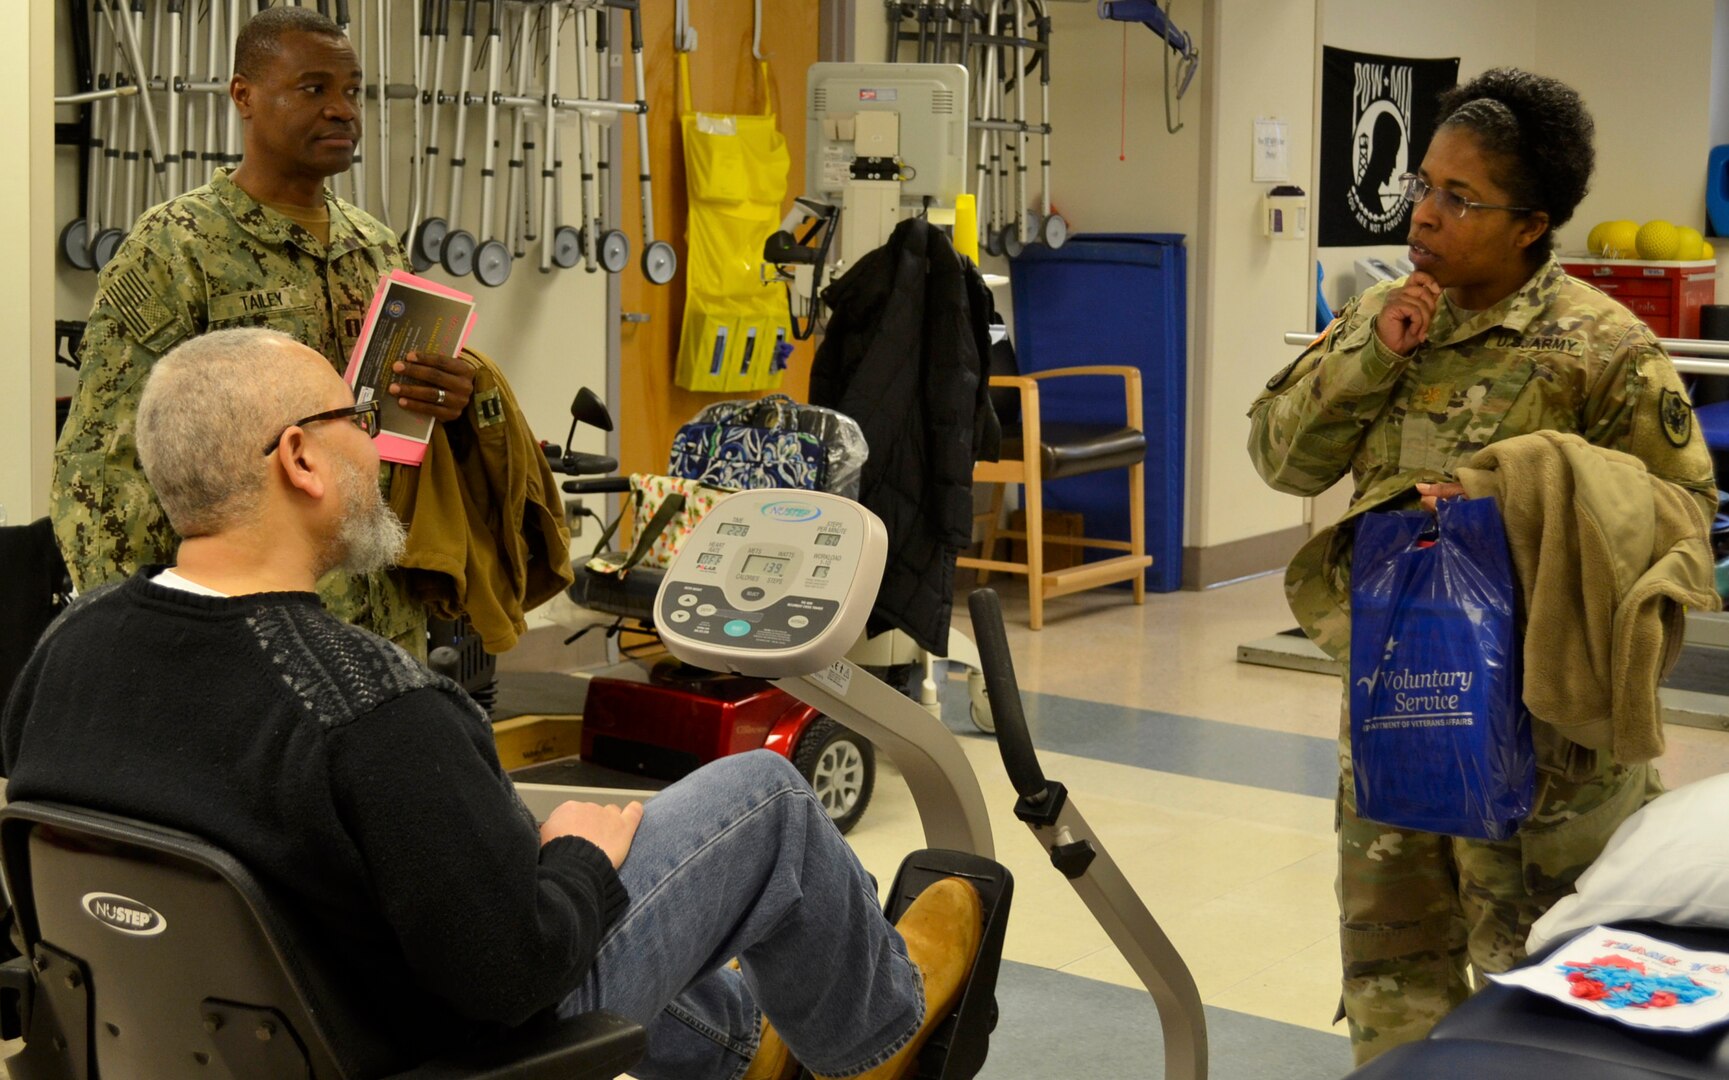 Army Maj. Andrea Jackson, a Medical division chief, right, and Navy Lt. Prince Tailey, a Medical branch chief, top left, listen to a patient receiving therapy care at the Corporal Michael J. Crescenz Veterans Affairs Medical Center, Feb. 11, 2019 in Philadelphia.